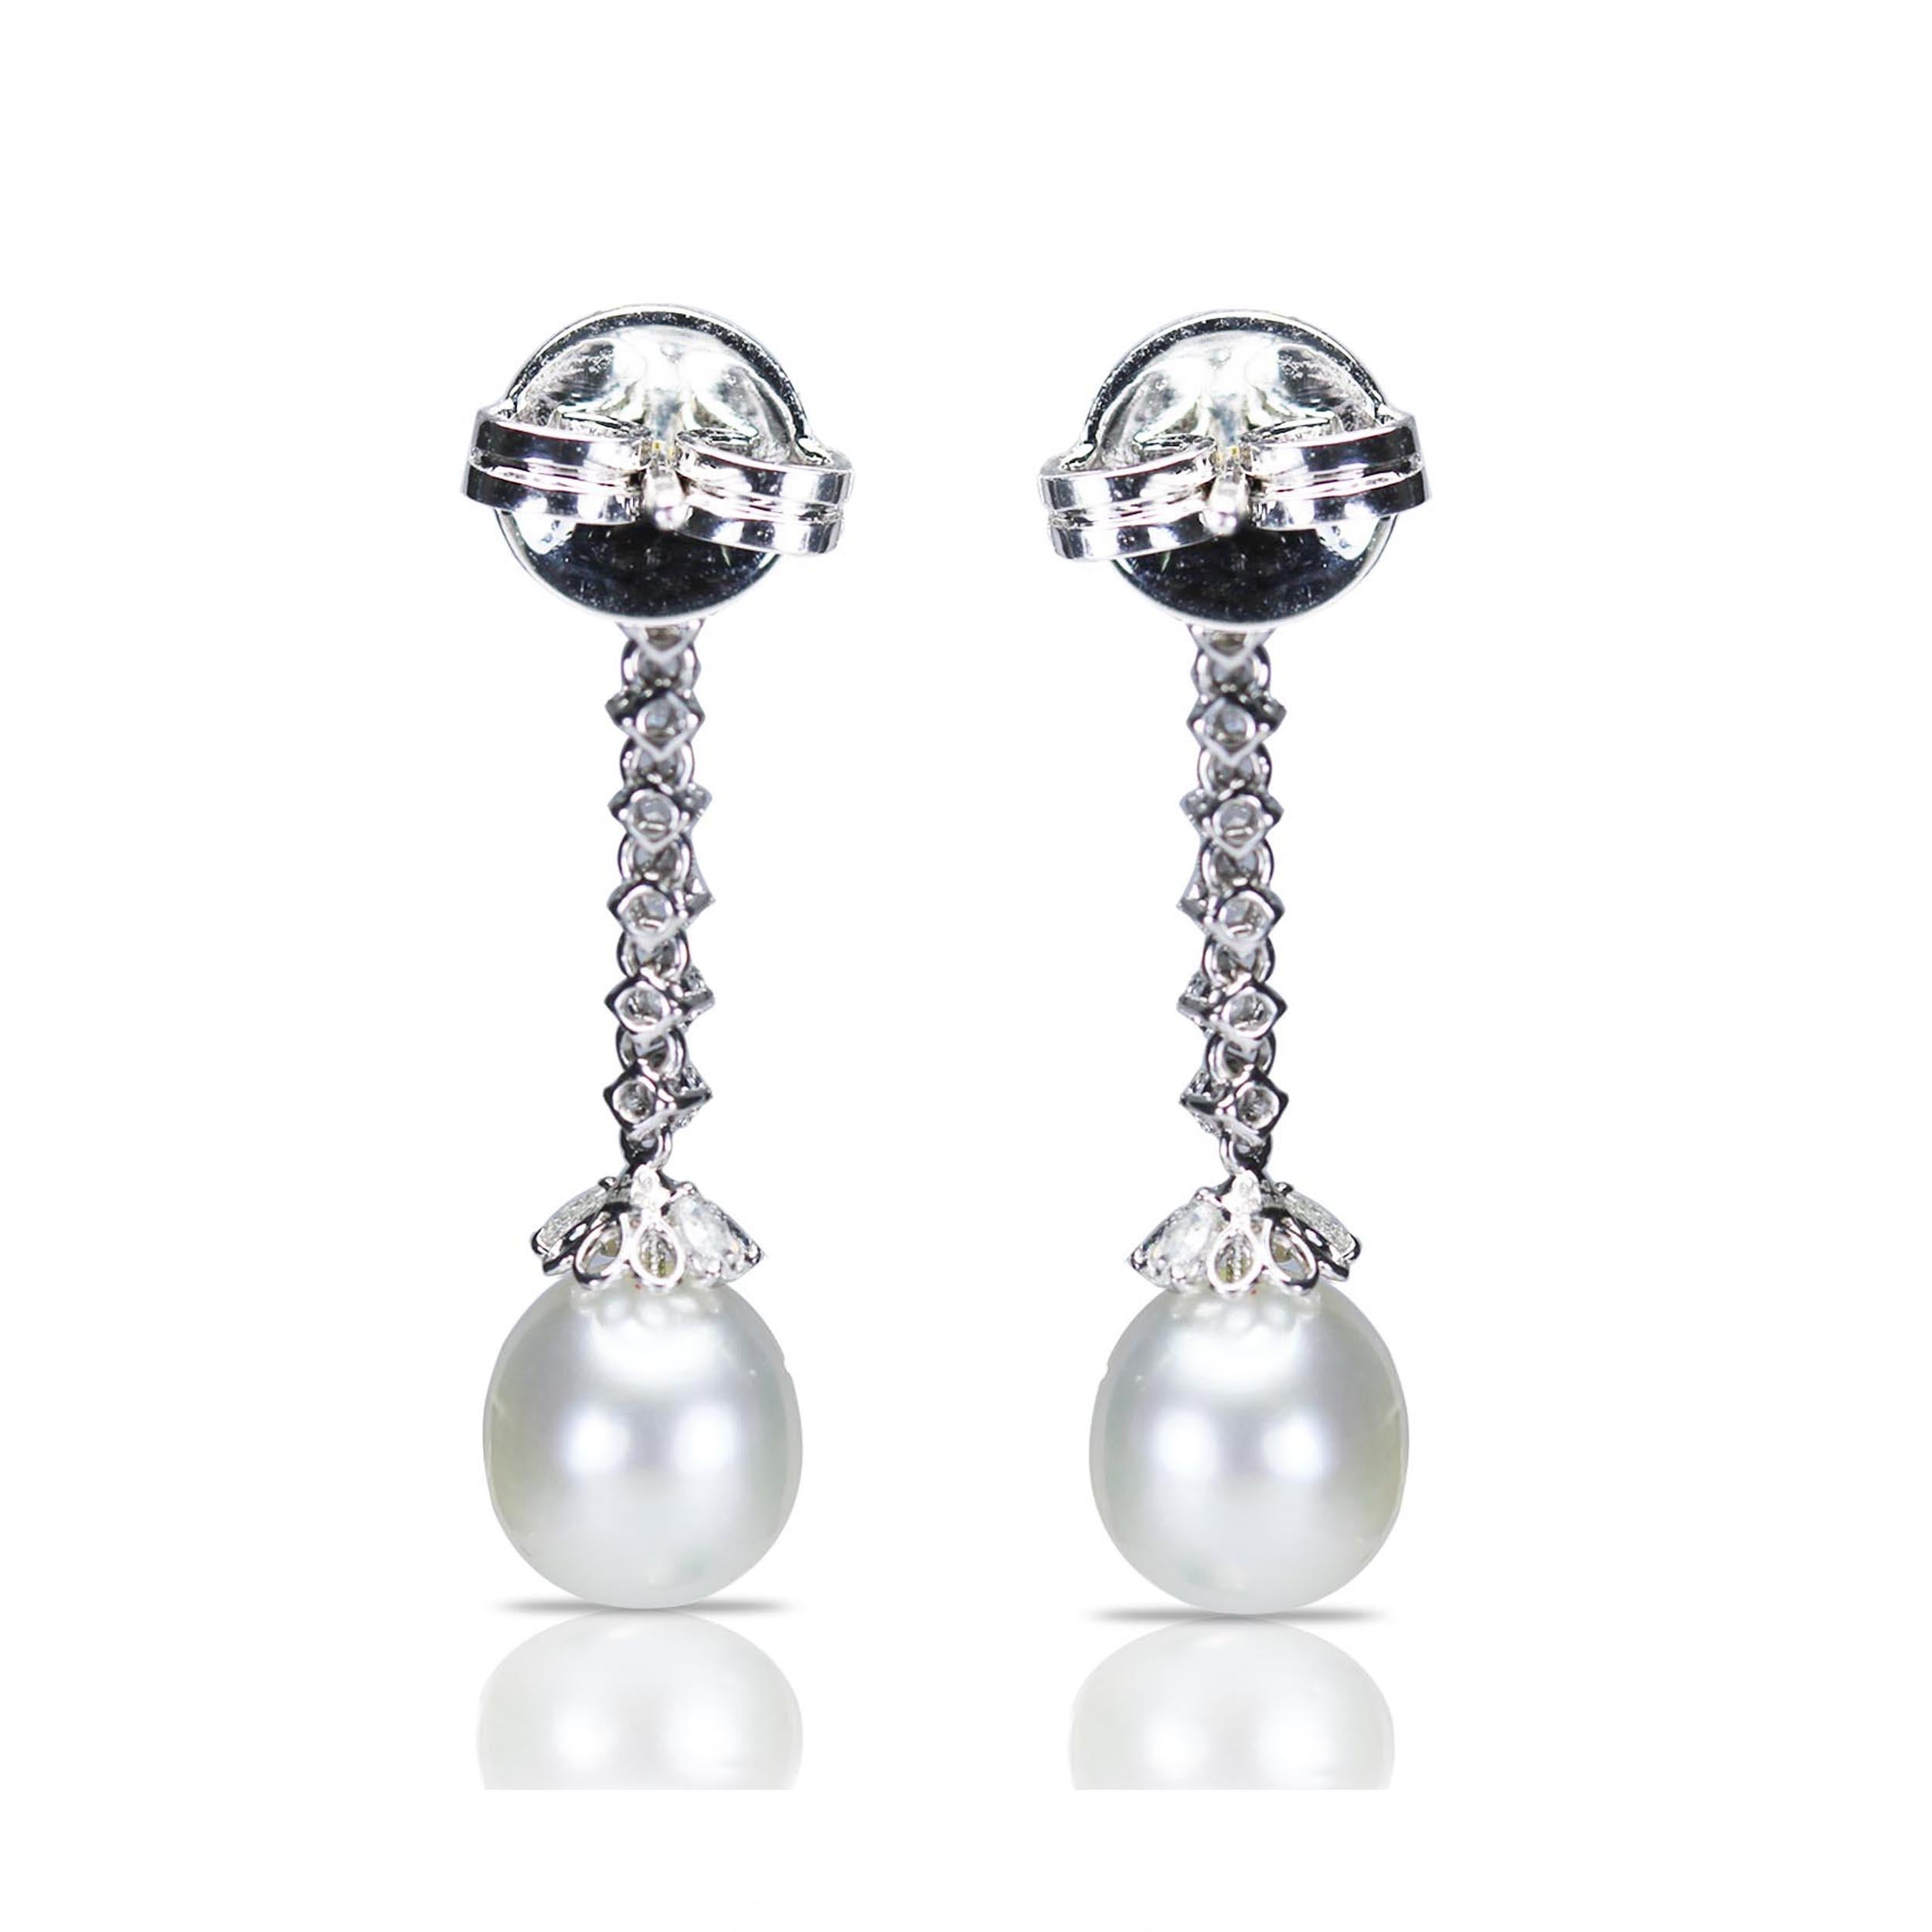 Contemporary Studio Rêves Rose cut Diamonds and South Sea Pearls Earrings in 18 Karat Gold For Sale